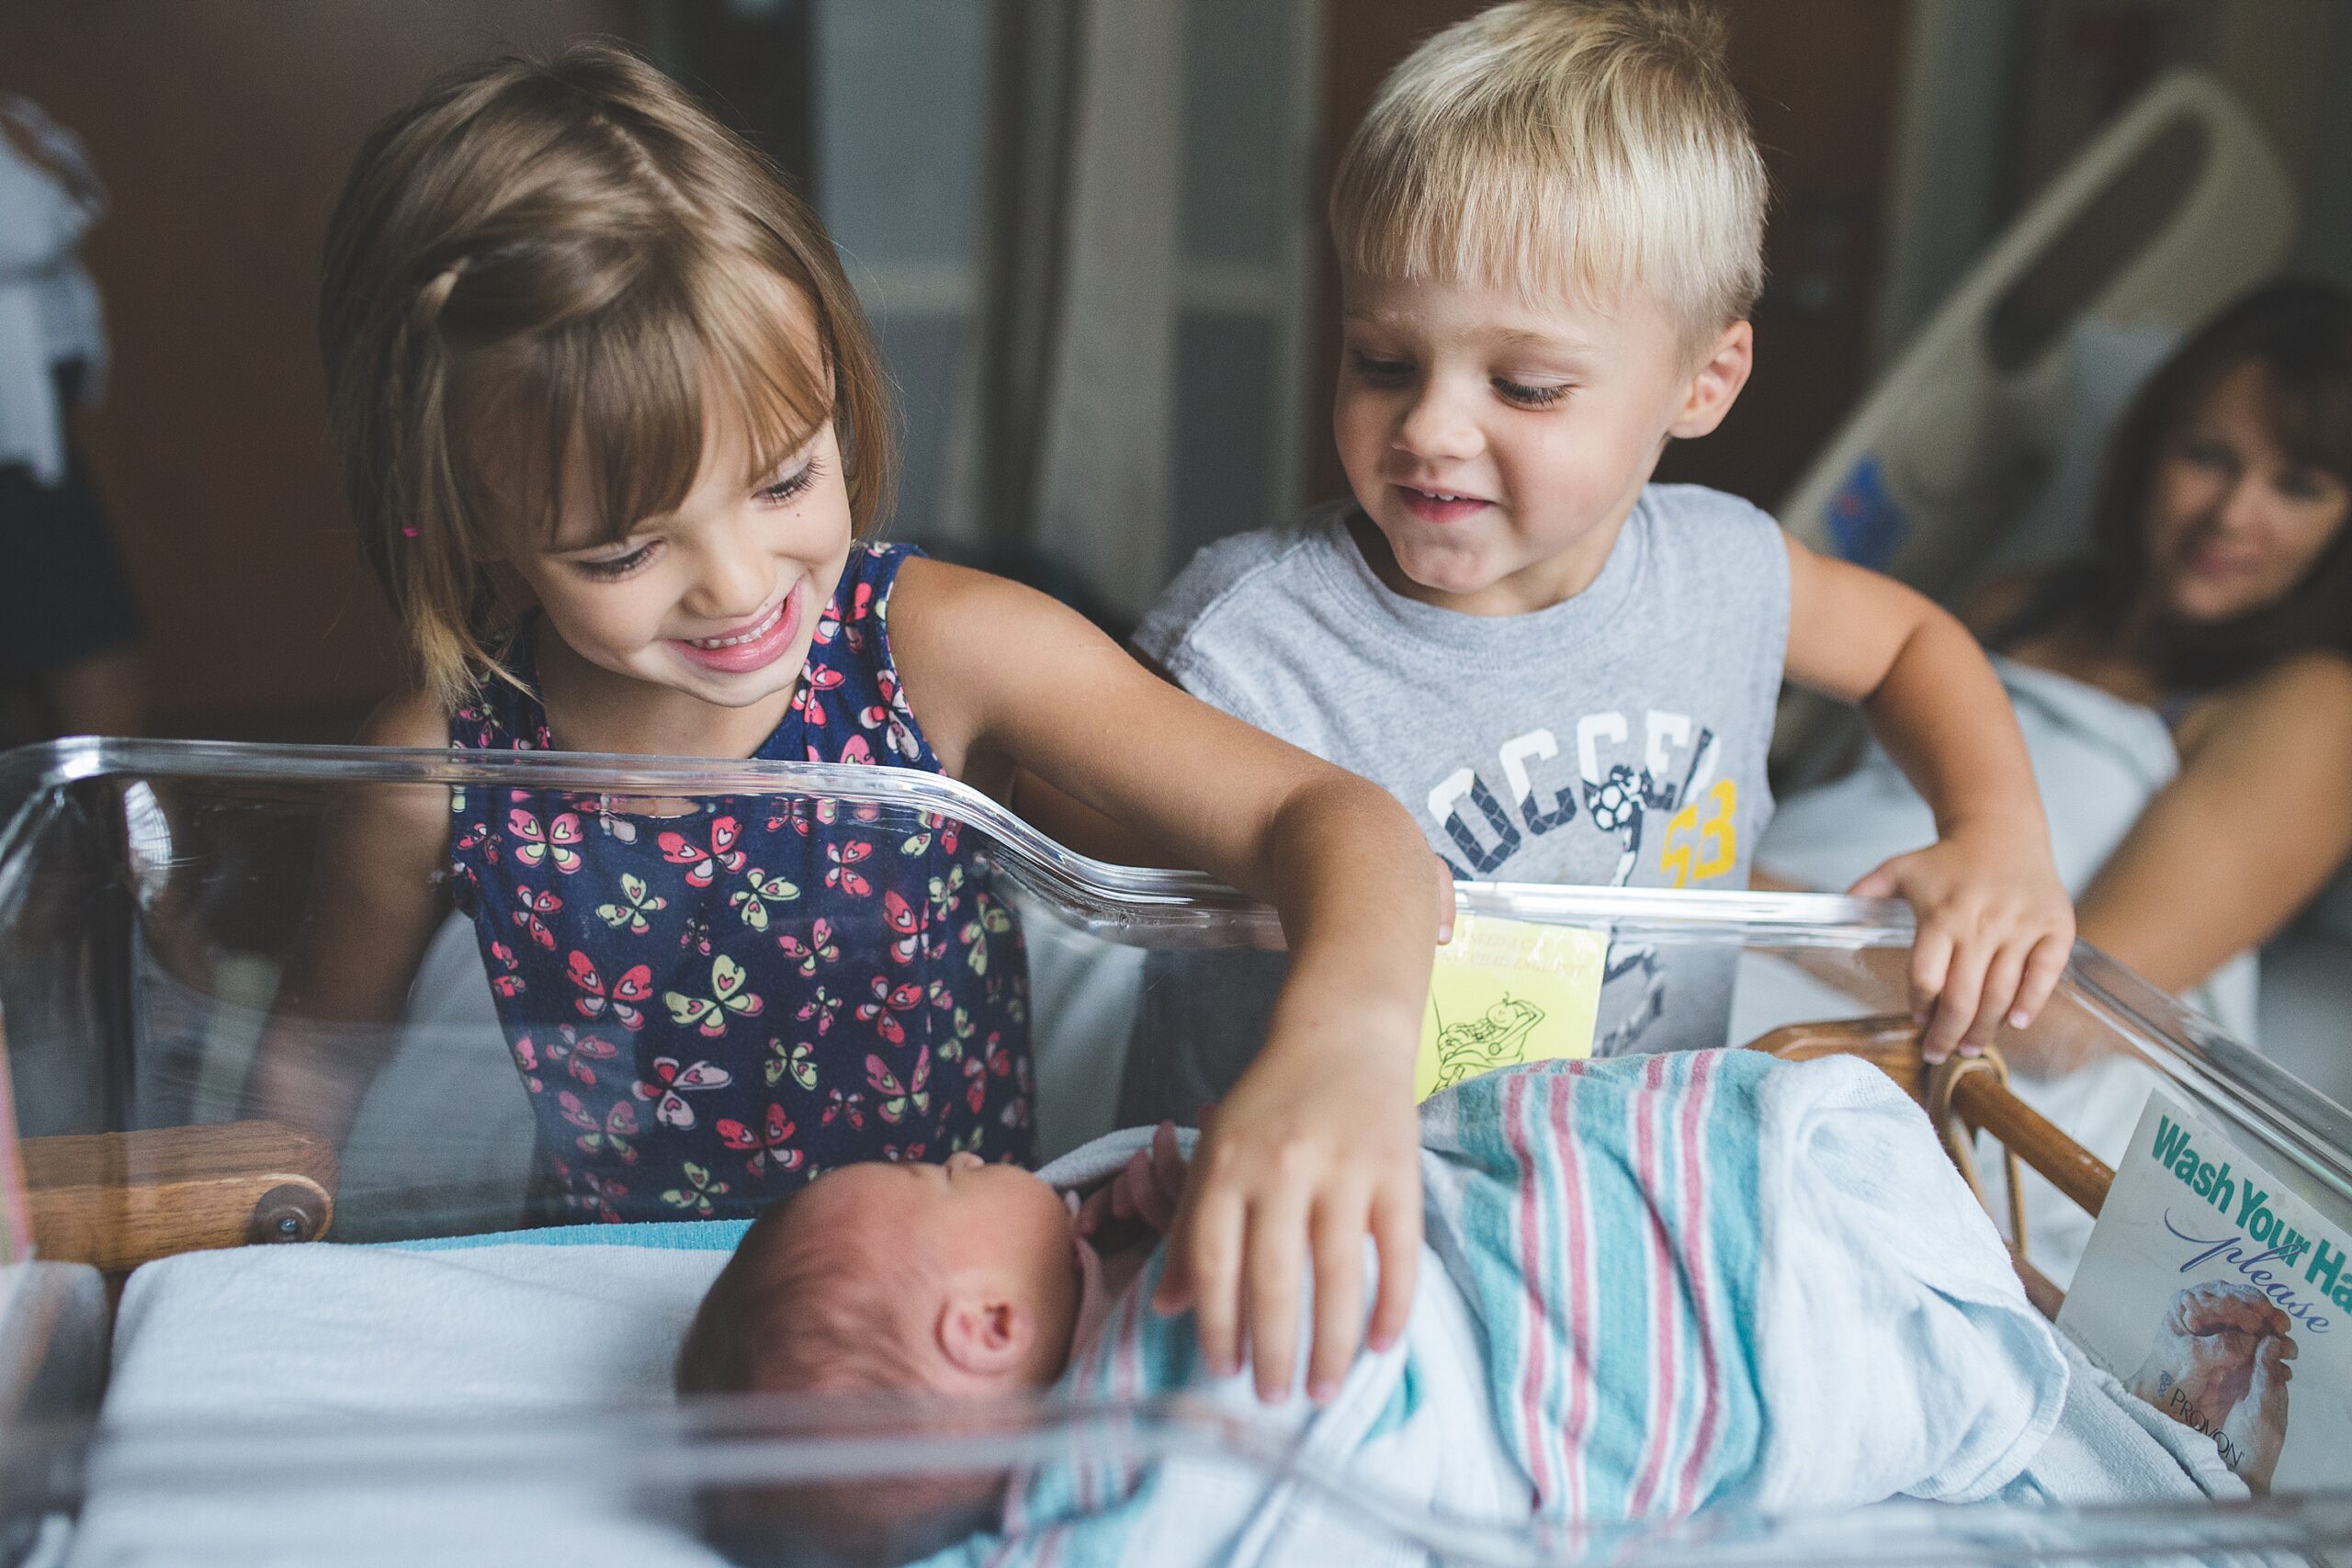 Two young children gleefully look at a newborn baby in a hospital bassinet while an adult rests in the background.